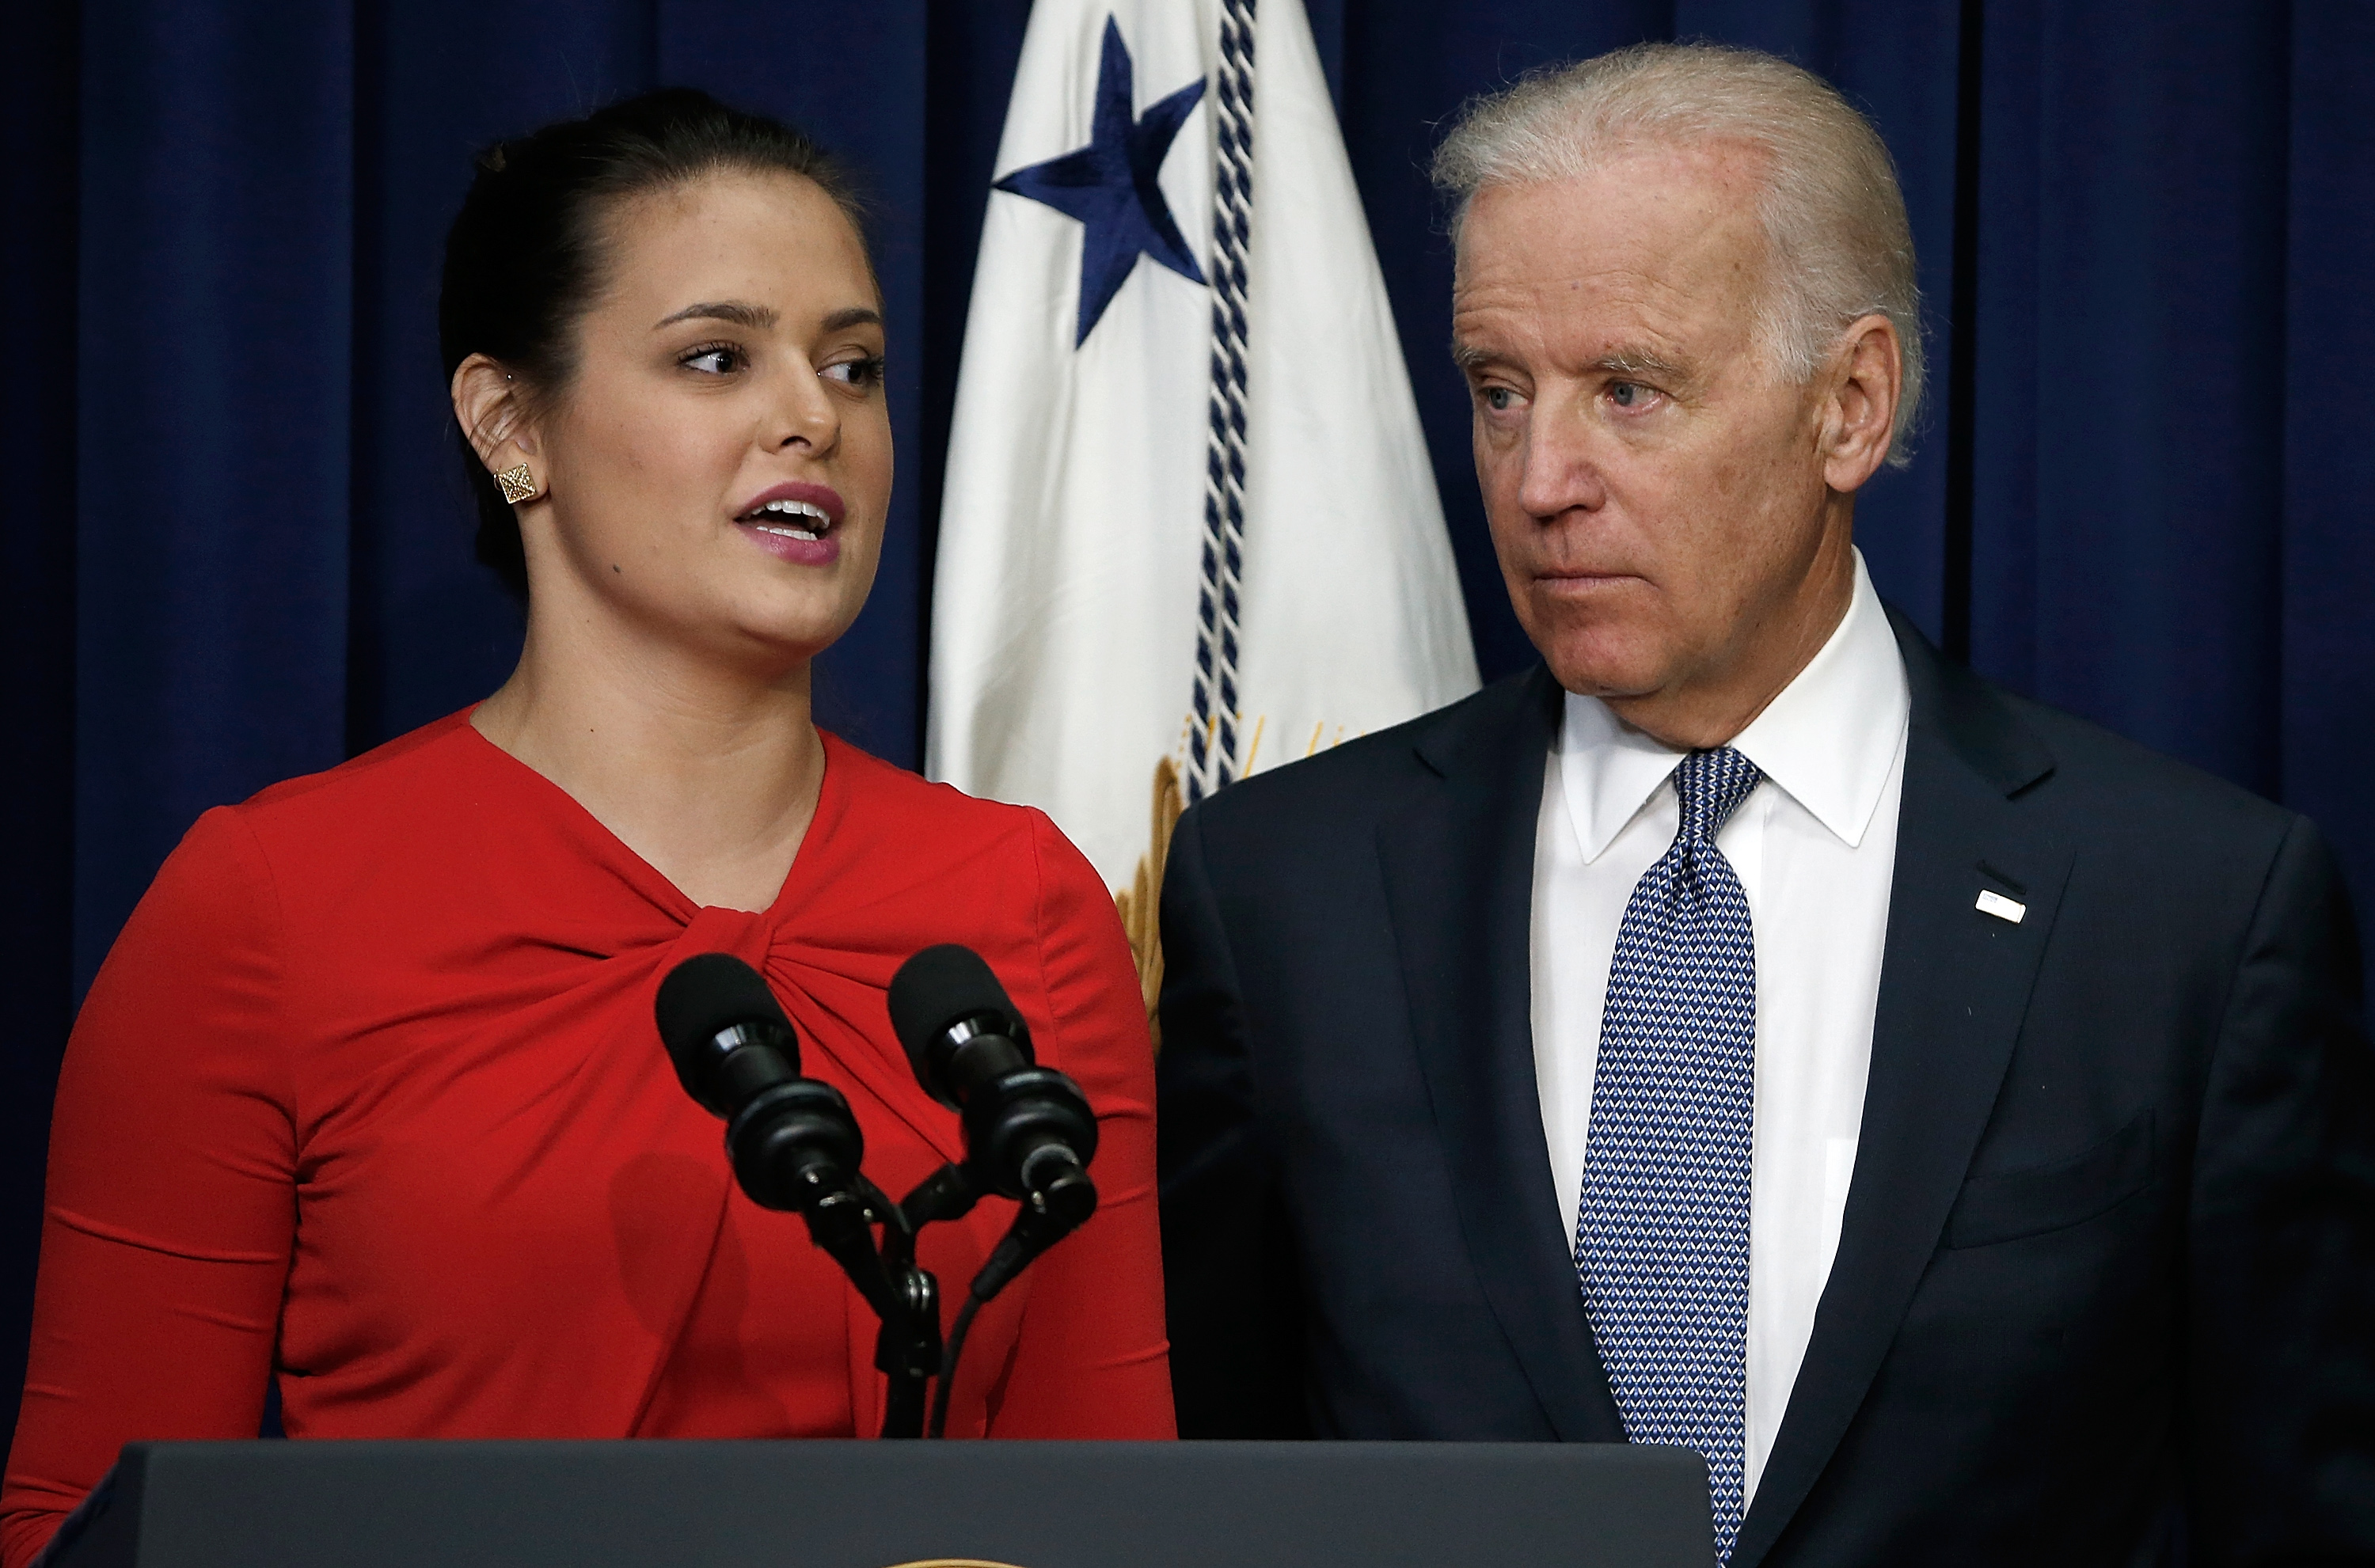 U.S Vice President Joe Biden listens as Madeleine Smith, a graduate of Harvard University who was raped while attending college, speaks during an event at the Eisenhower Executive Office Building, April 29, 2014 in Washington, DC. During the event, Biden announced the release of the first report of the White House Task Force to Protect Students from Sexual Assault. (Win McNamee&mdash;Getty Images)